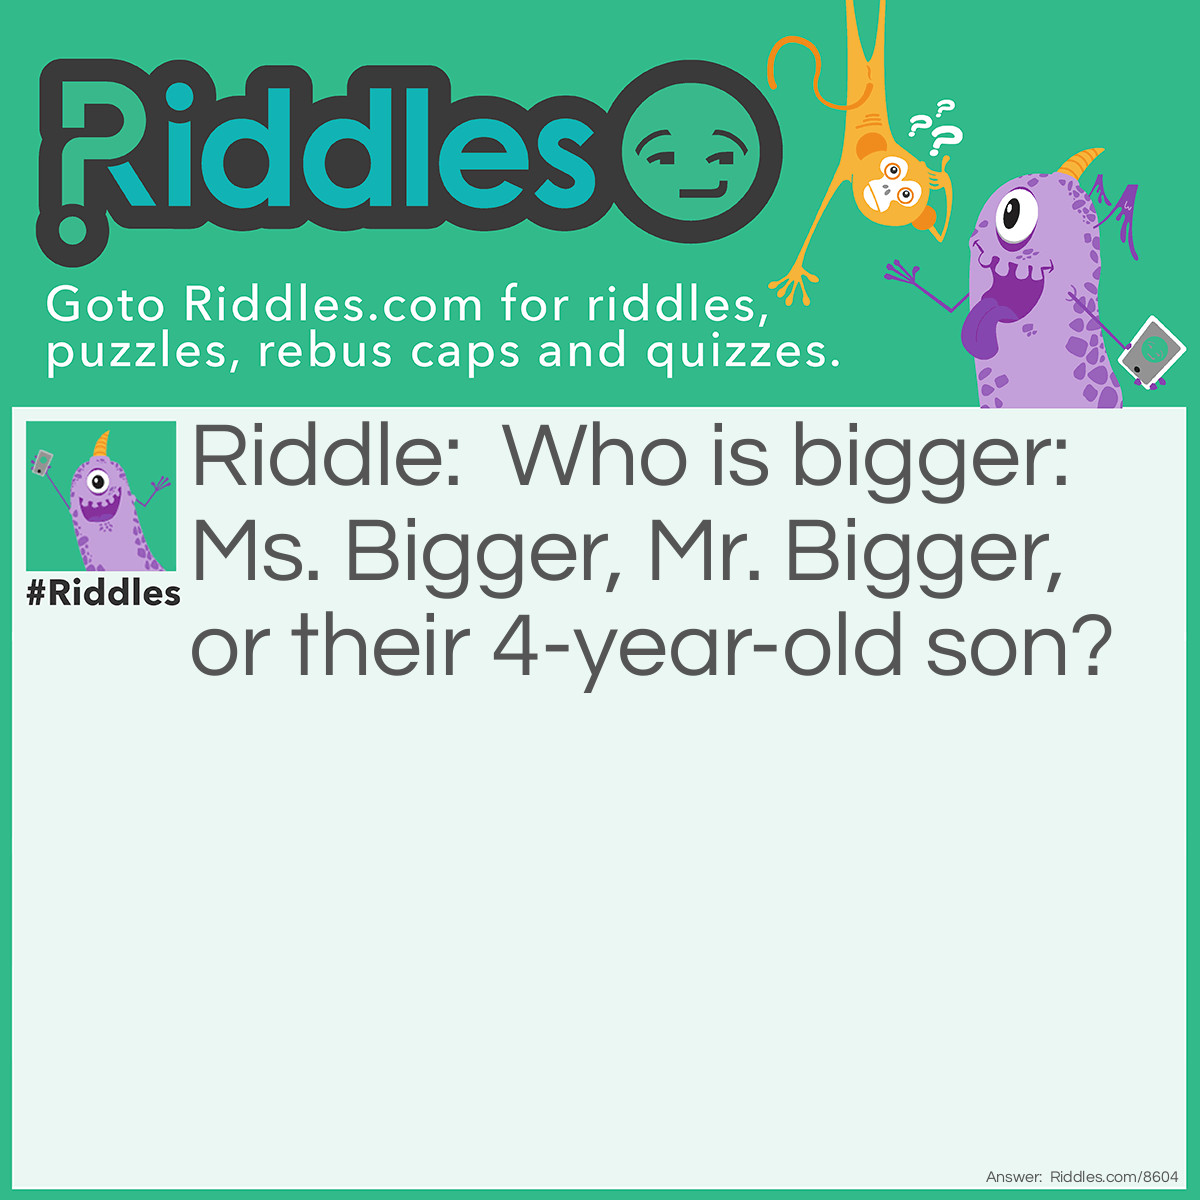 Riddle: Who is bigger: Ms. Bigger, Mr. Bigger, or their 4-year-old son? Answer: The son because he is a little Bigger!